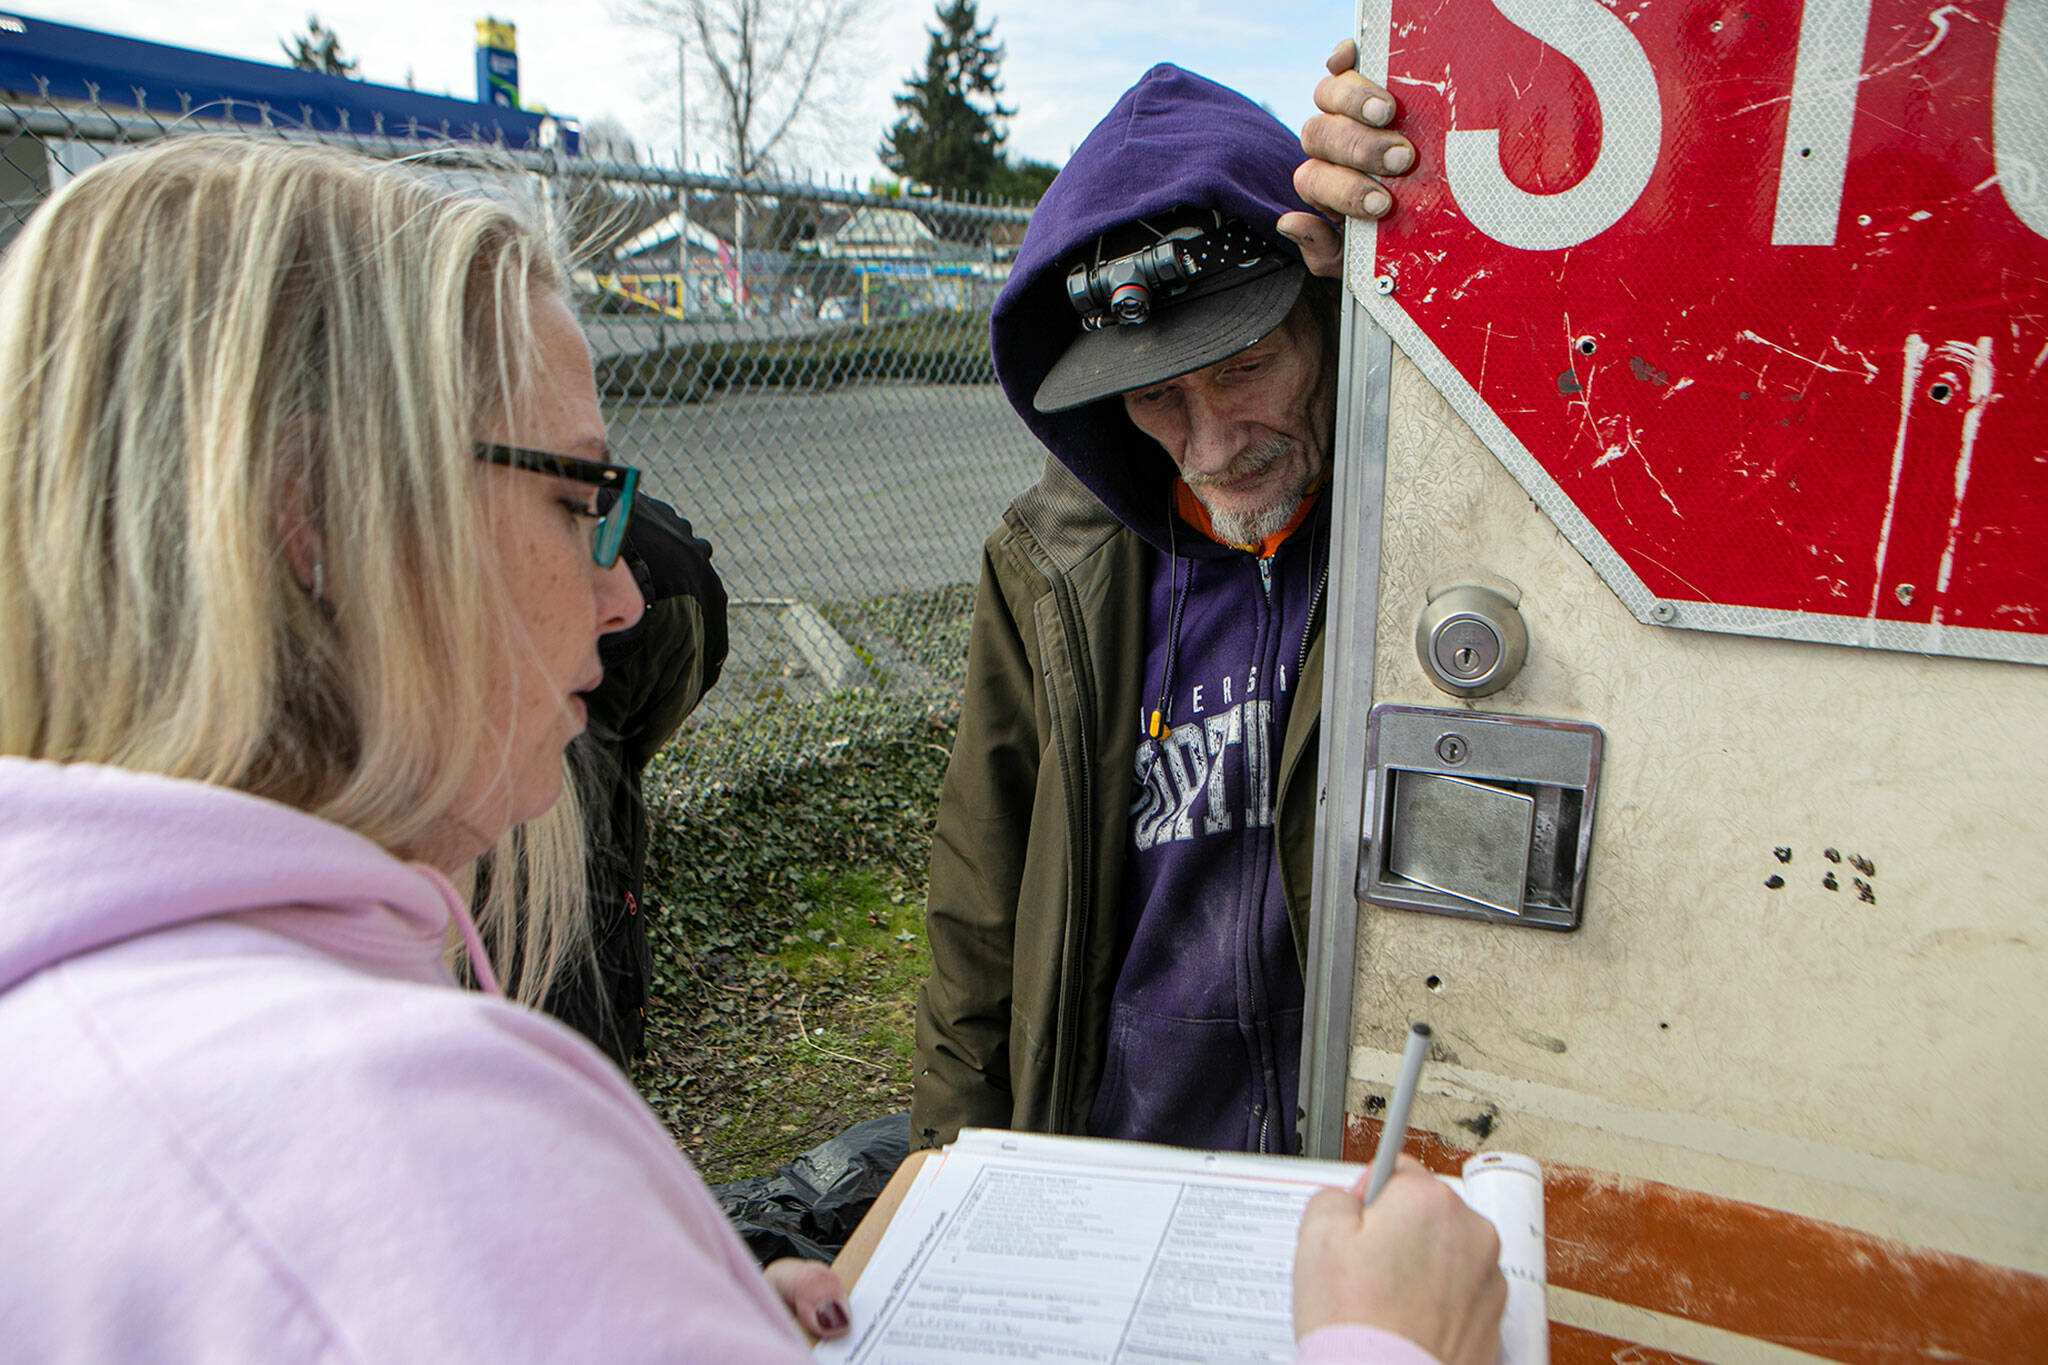 Community service counselor Mandy Jeffcott talks with Fred Prain while conducting a point-in-time count of people experiencing homelessness Tuesday, Feb. 22, 2022, in Everett, Washington. Prain, 61, has been living out of his RV. (Ryan Berry / The Herald)